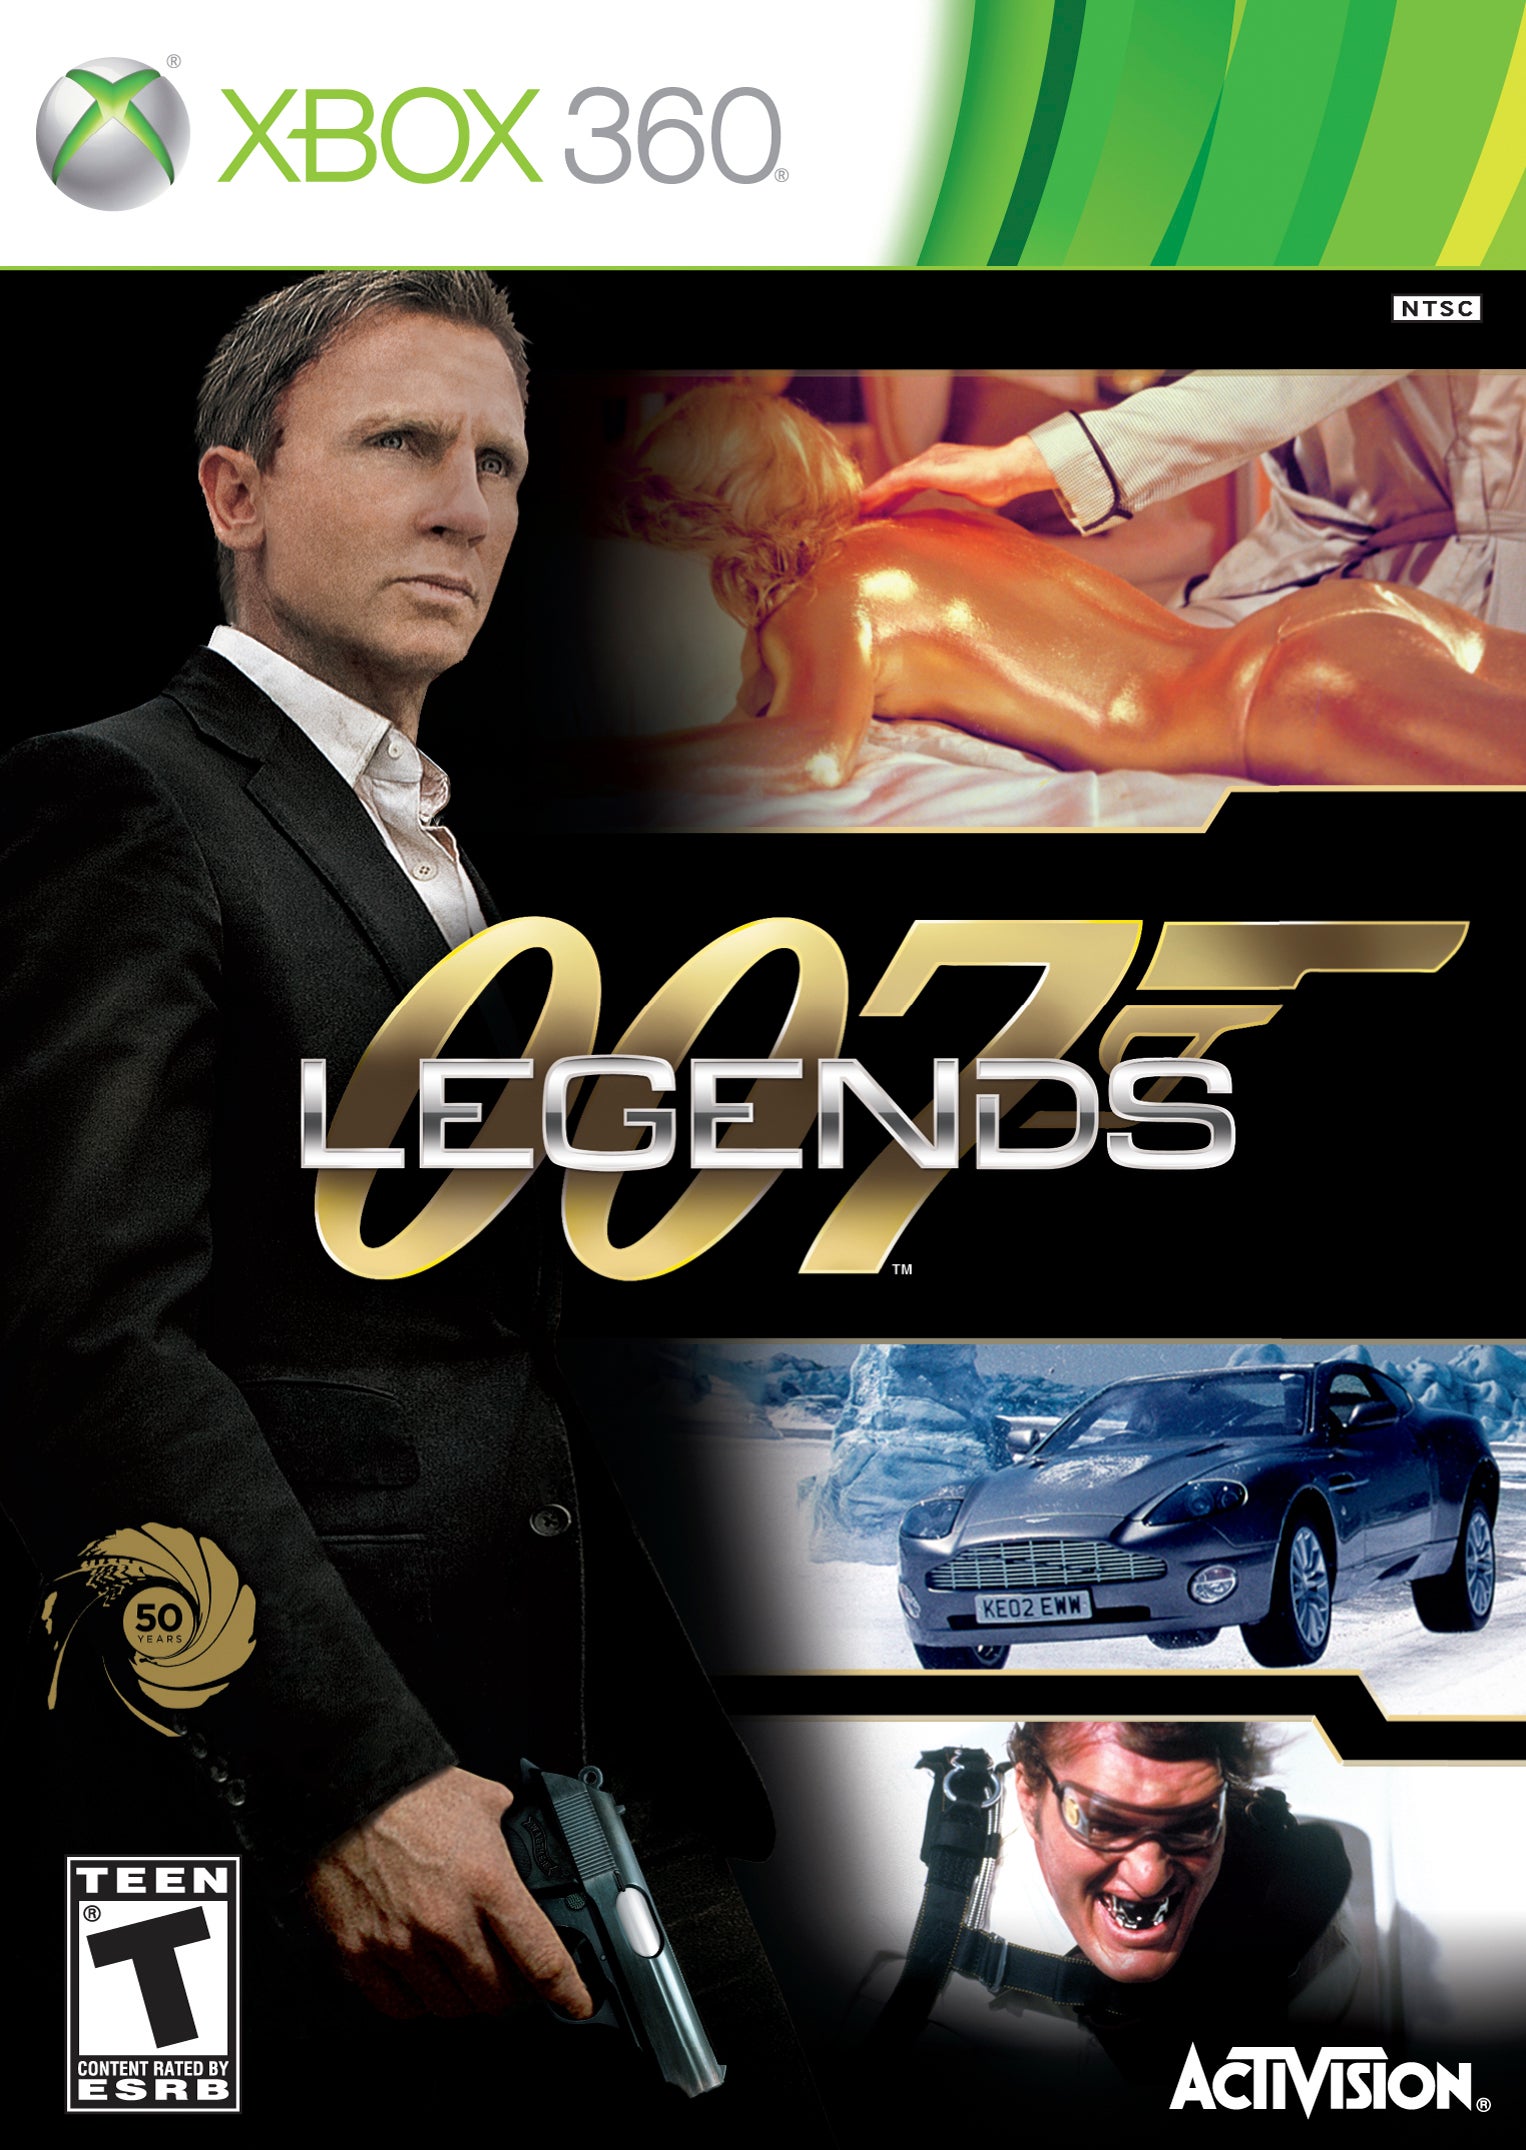 007 games